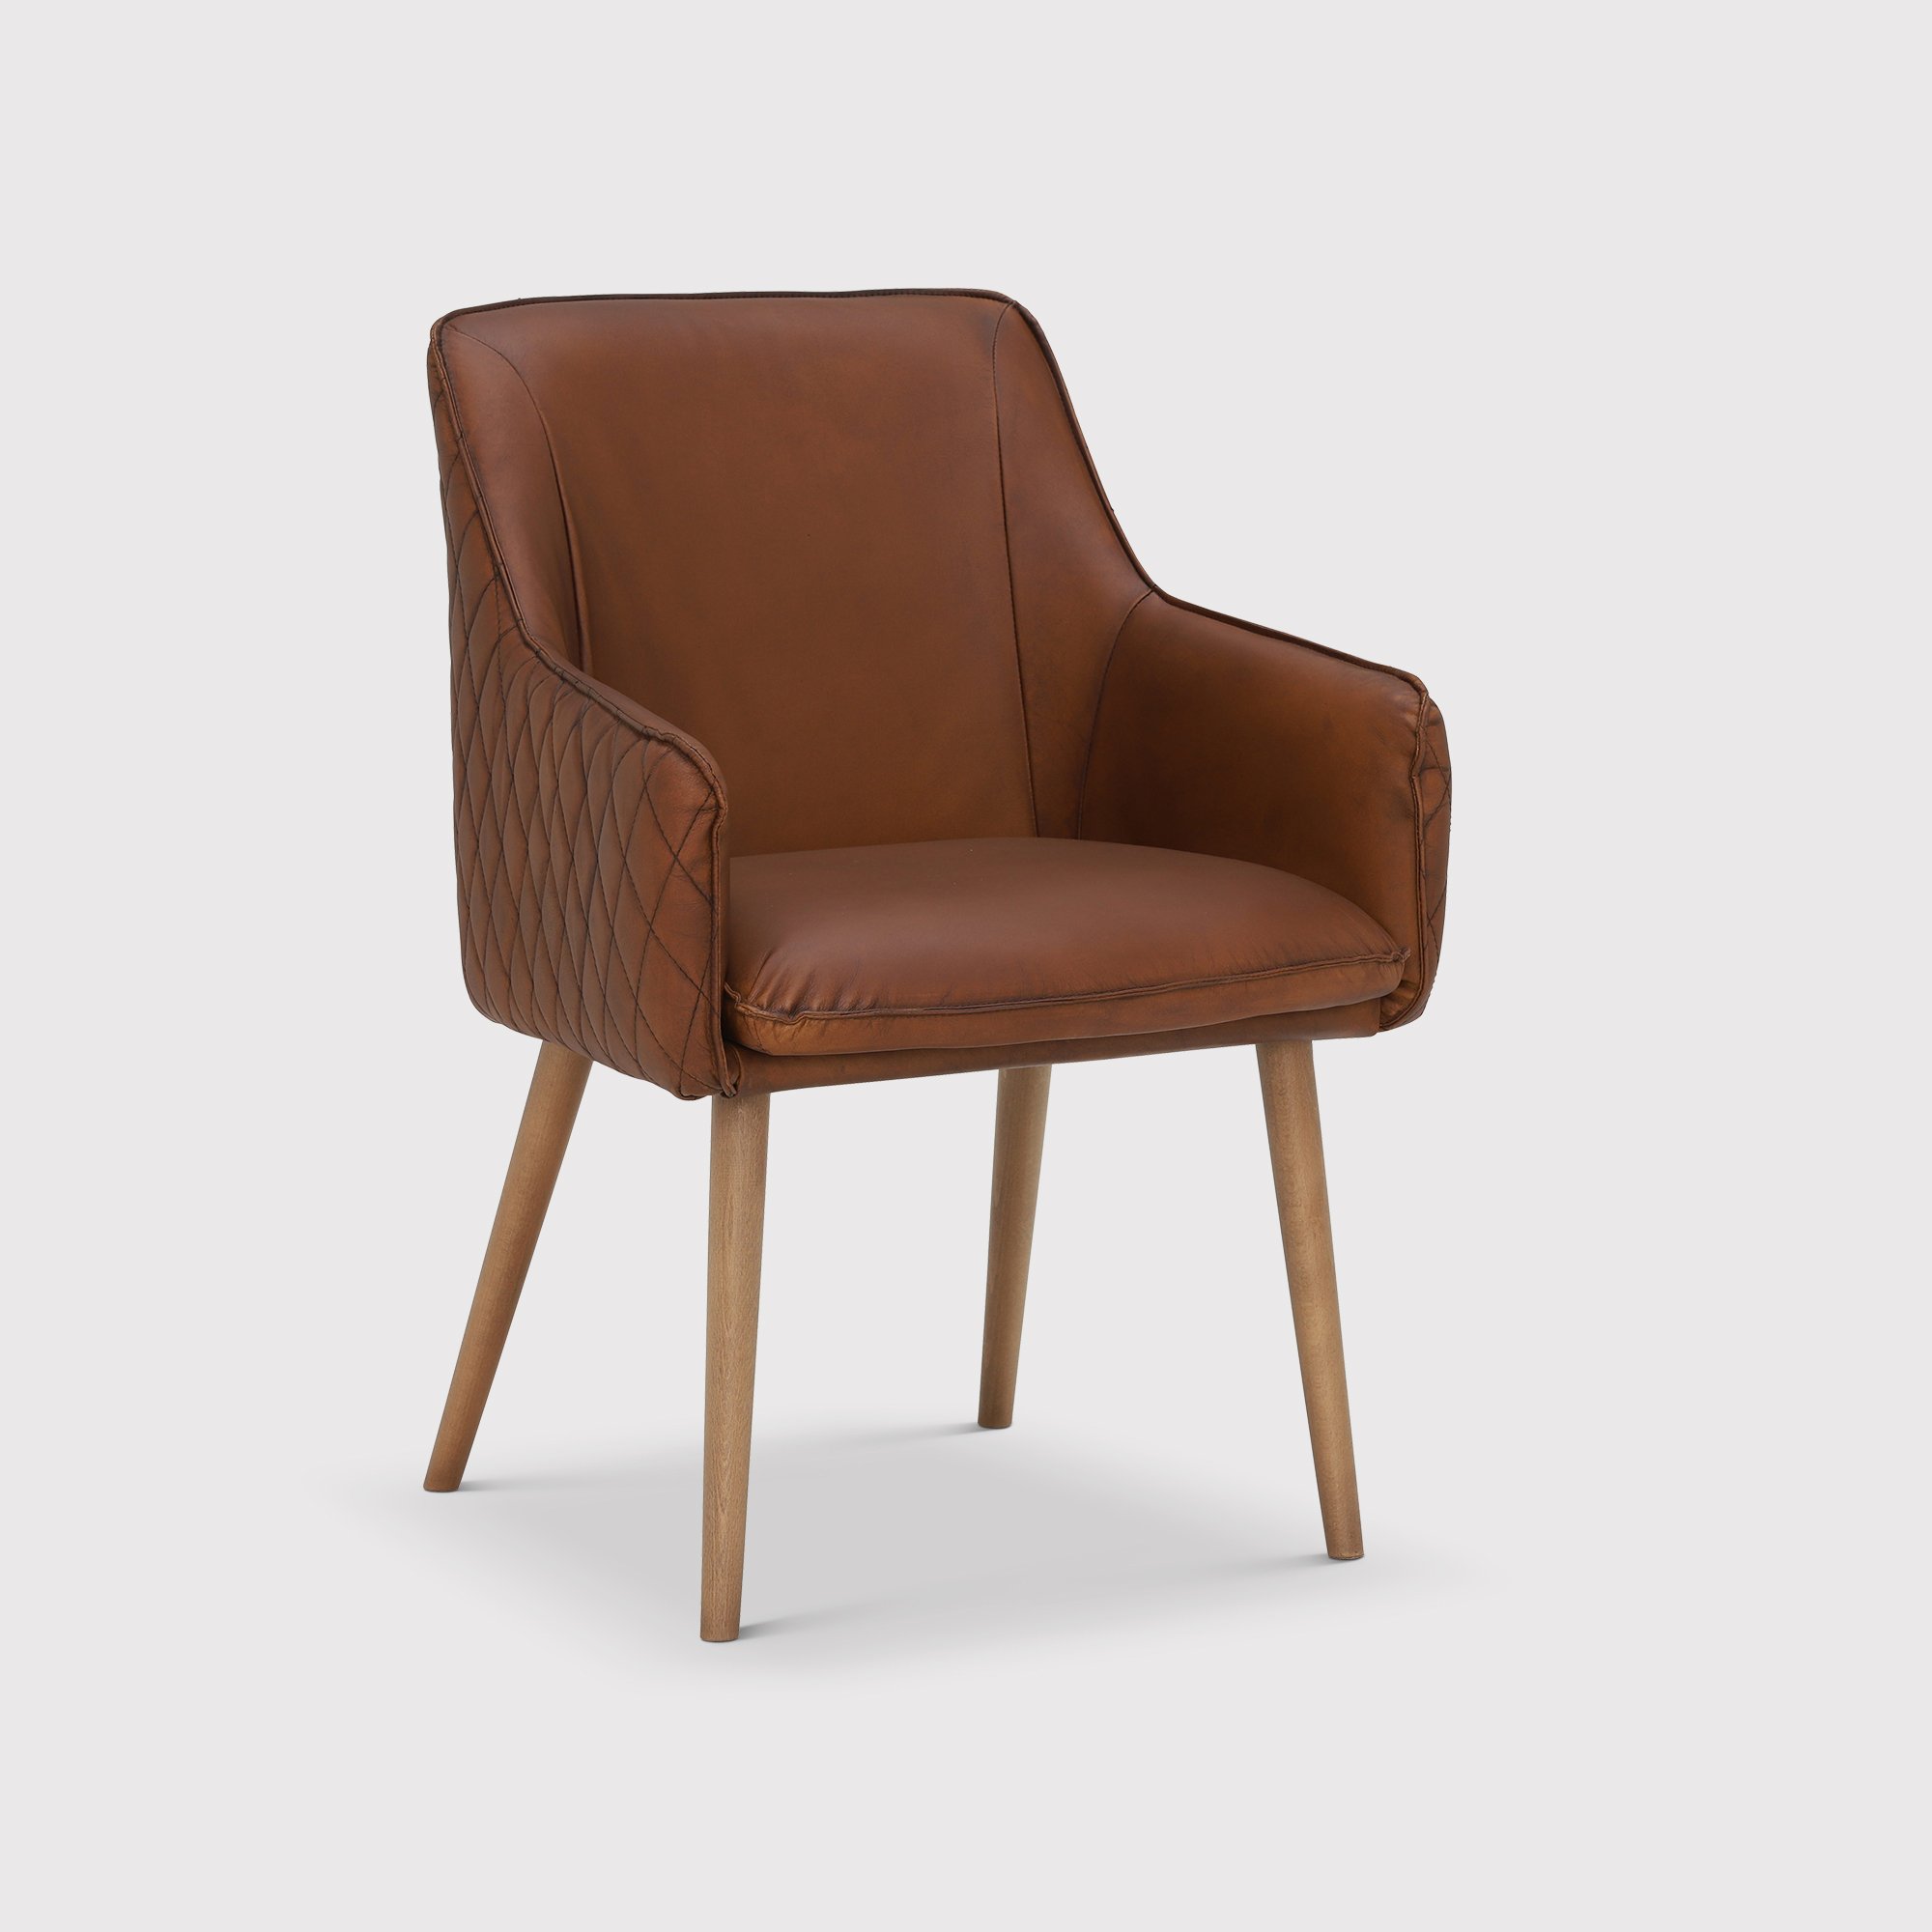 Pure Furniture Antares Dining Dining Chair With Arms, Brown | Barker & Stonehouse